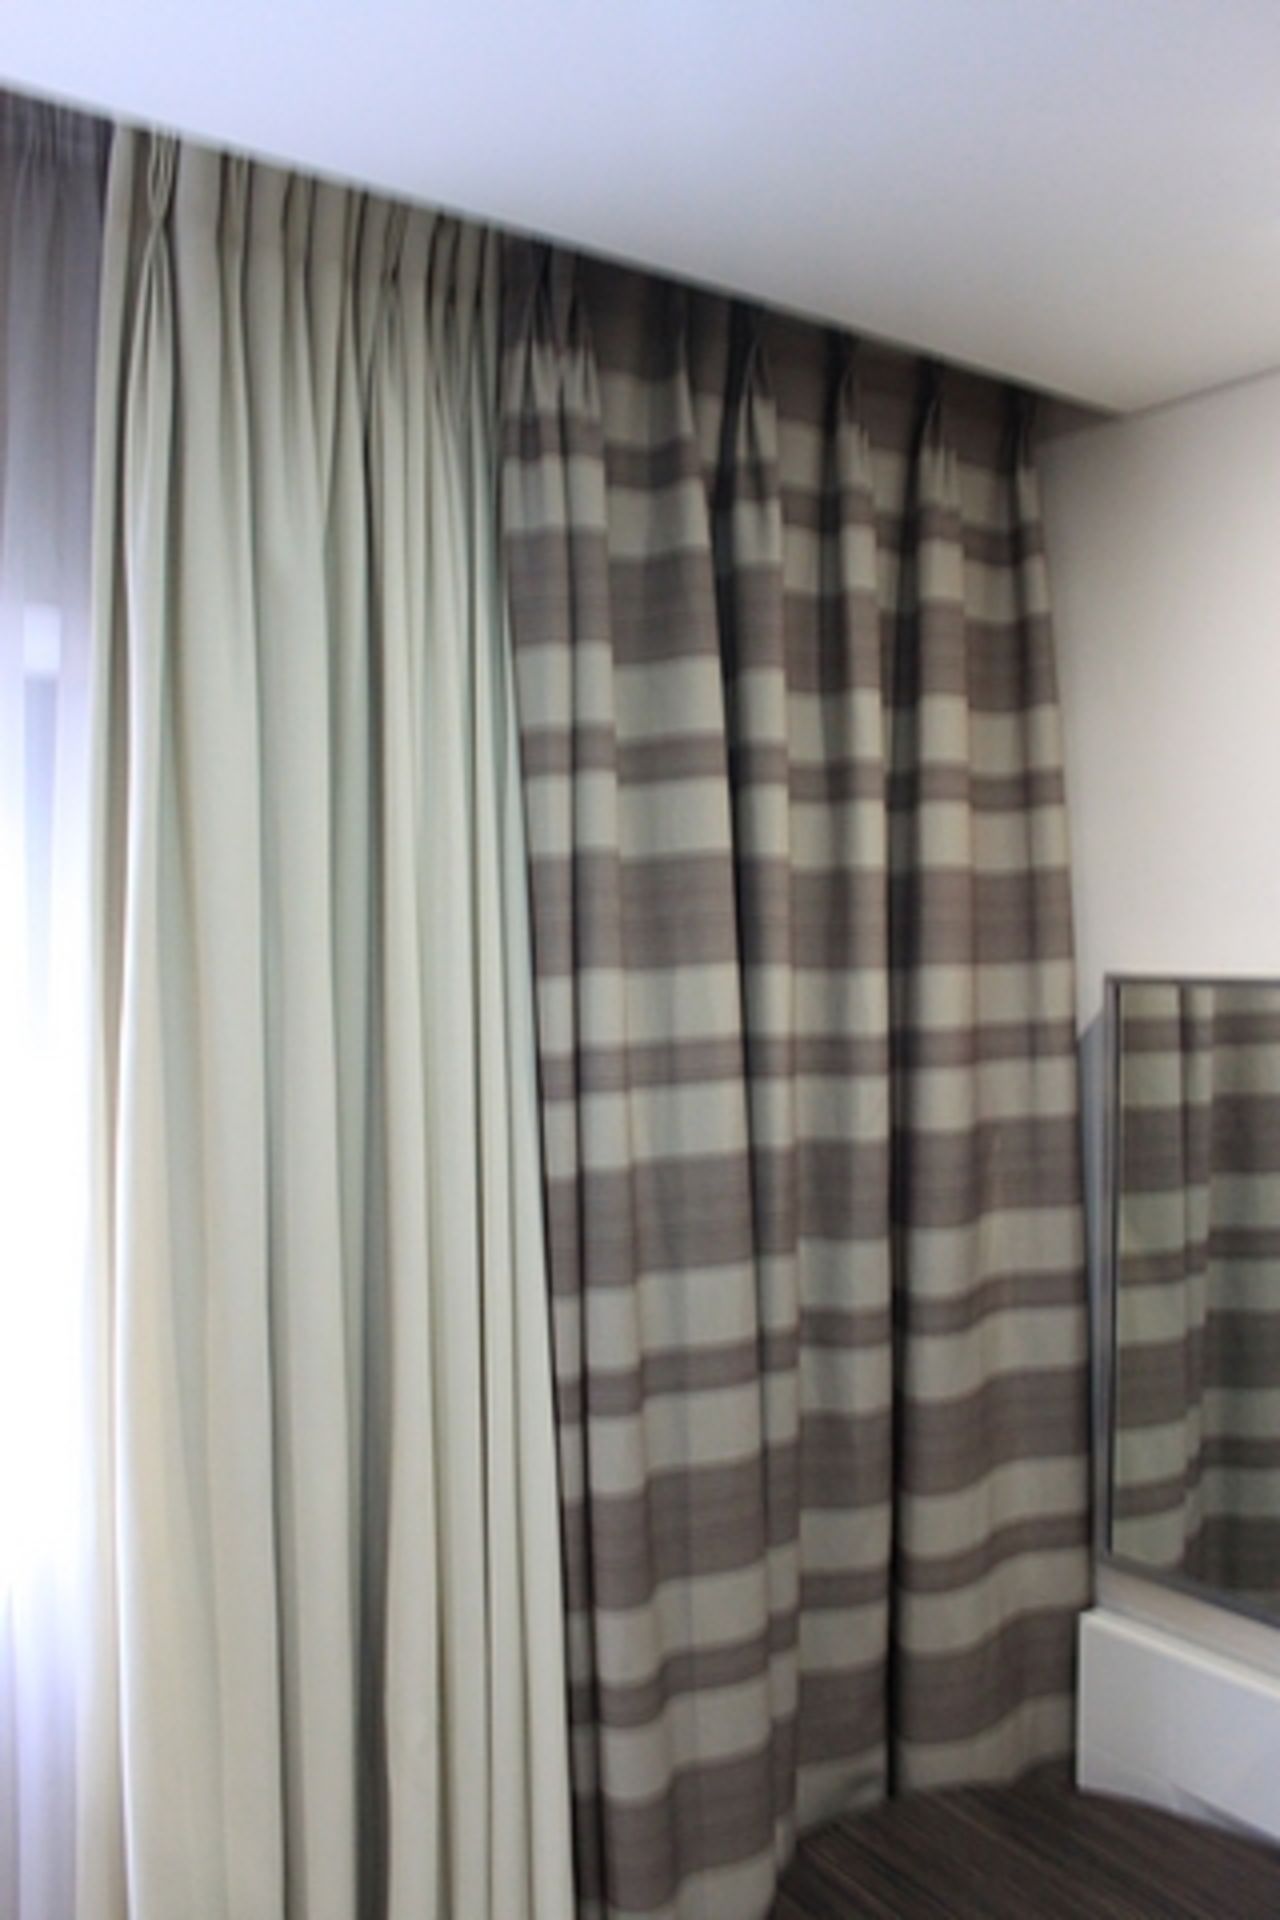 Sinclaire Fabrics a pair of drapes lined with blackout fabric spans 2000 x 2600mm (DB32AP1) - Image 2 of 4